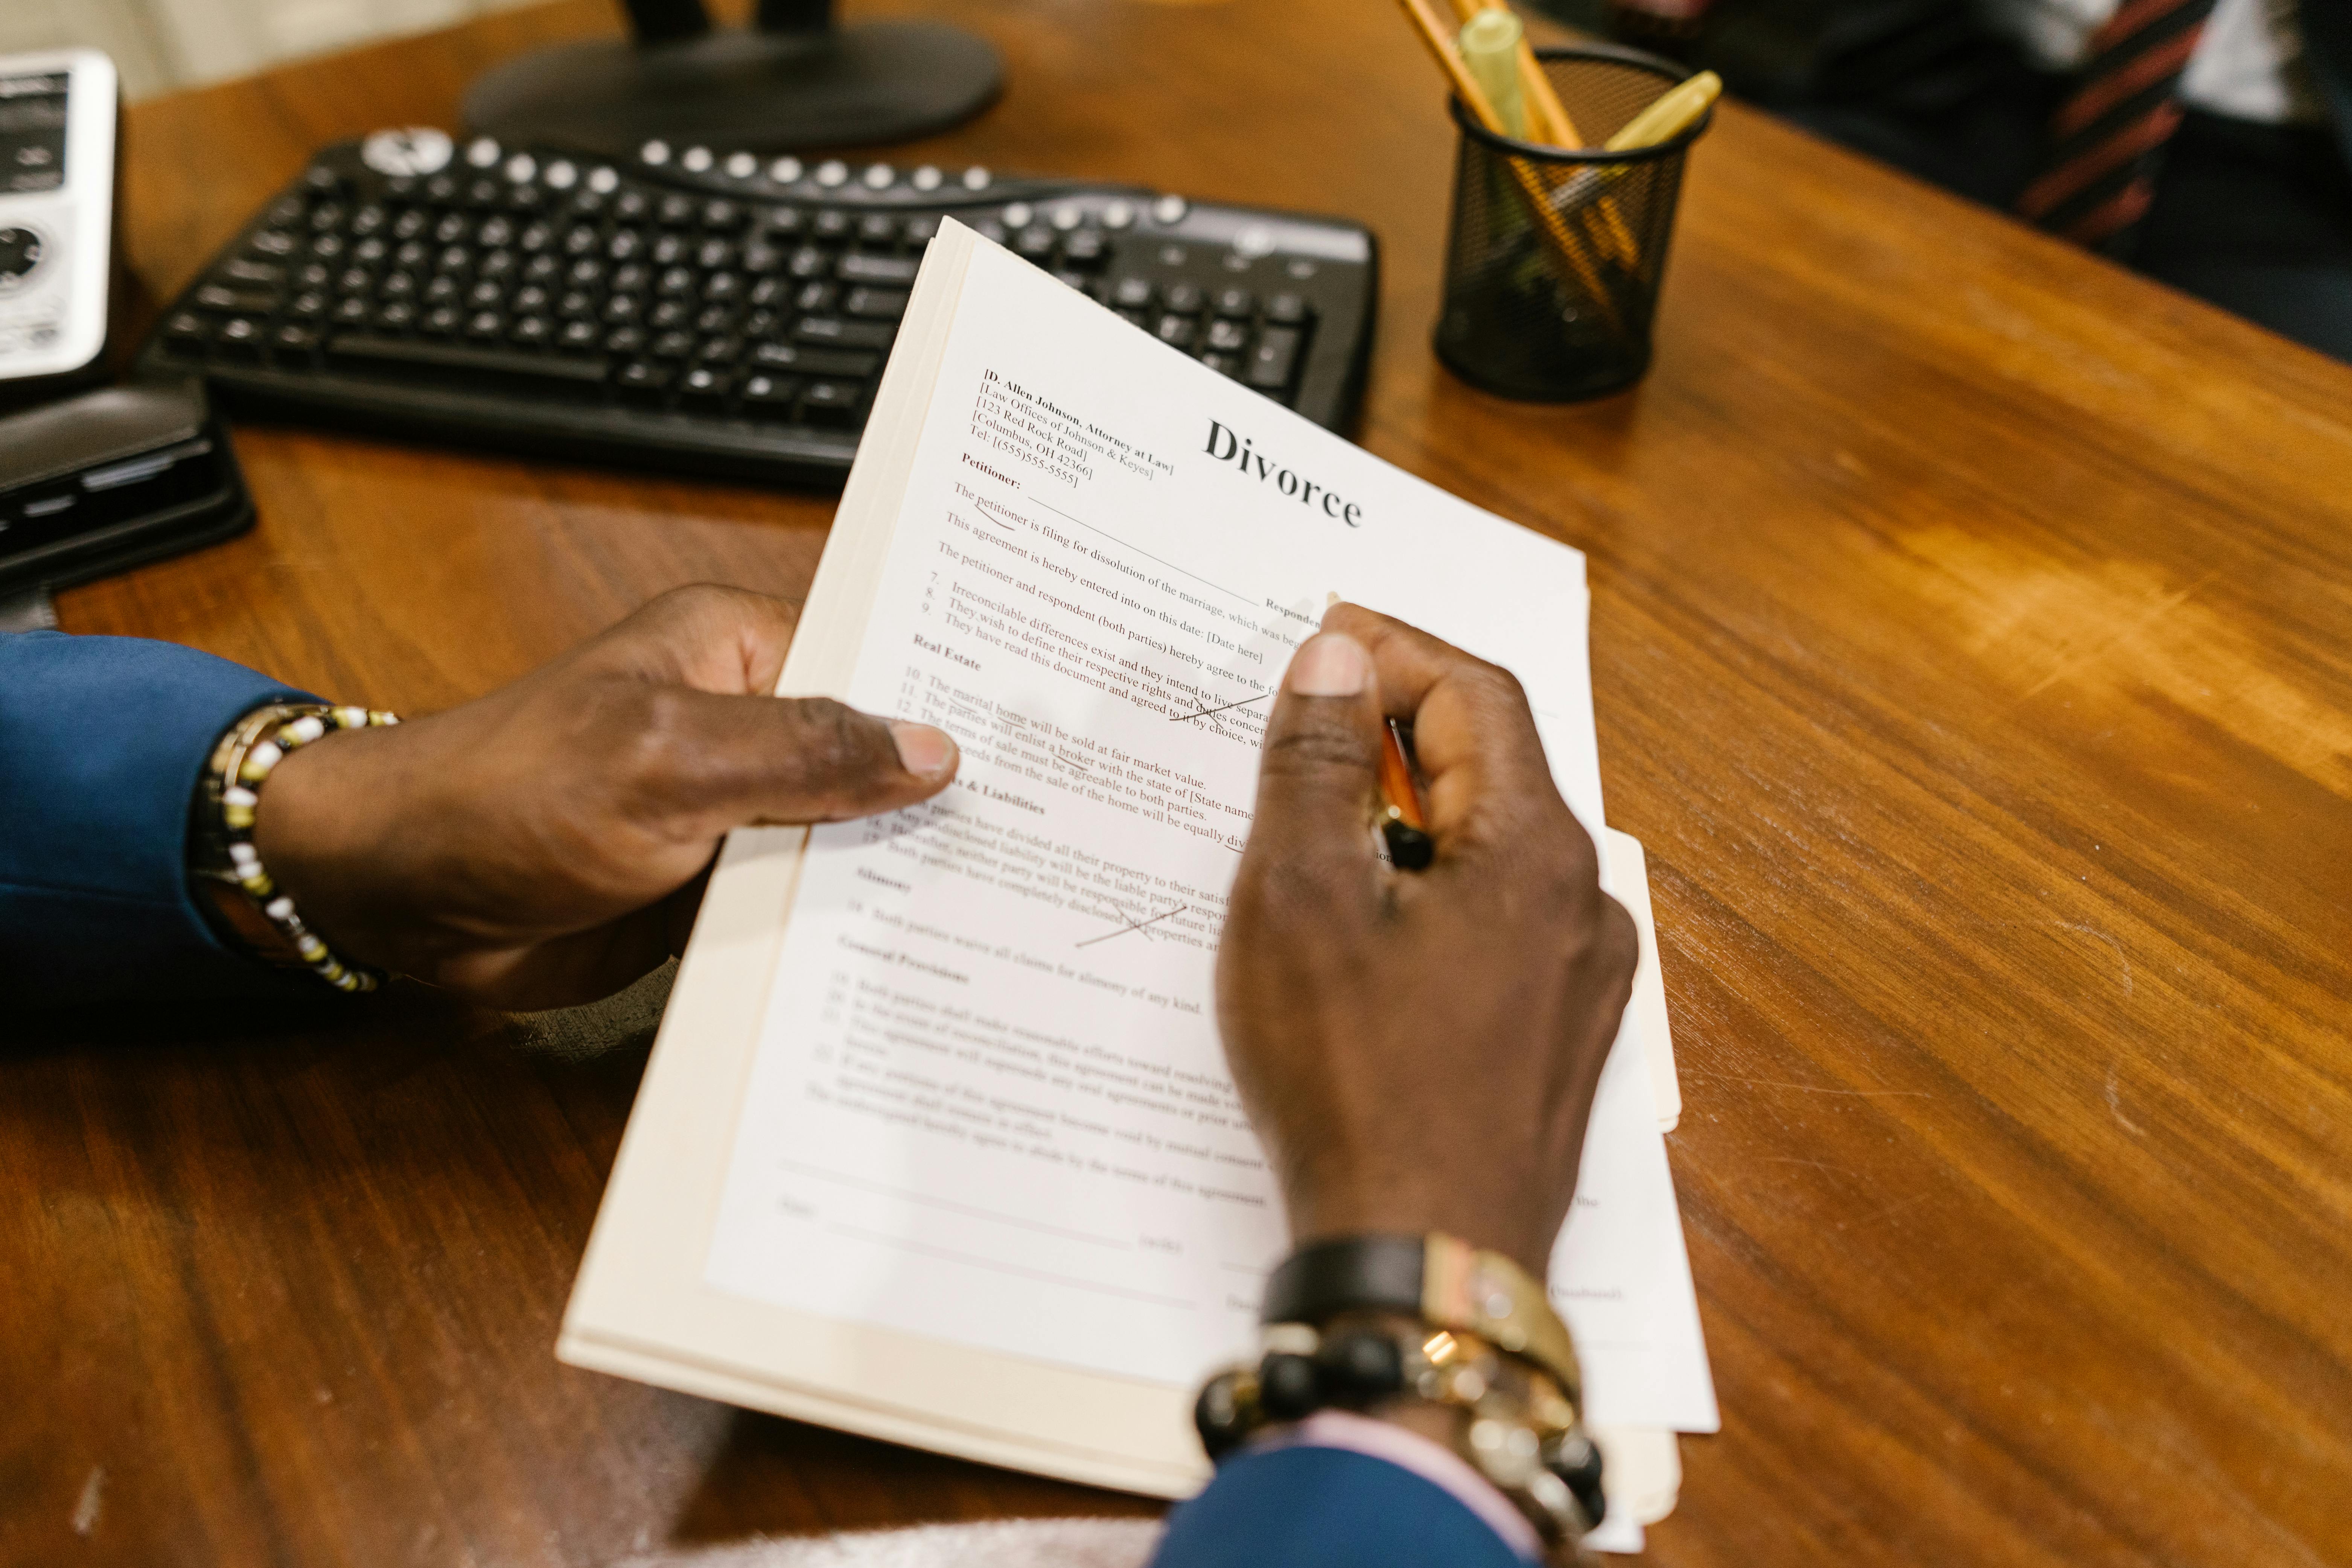 Jane finalizes the divorce papers with her lawyer | Source: Pexels